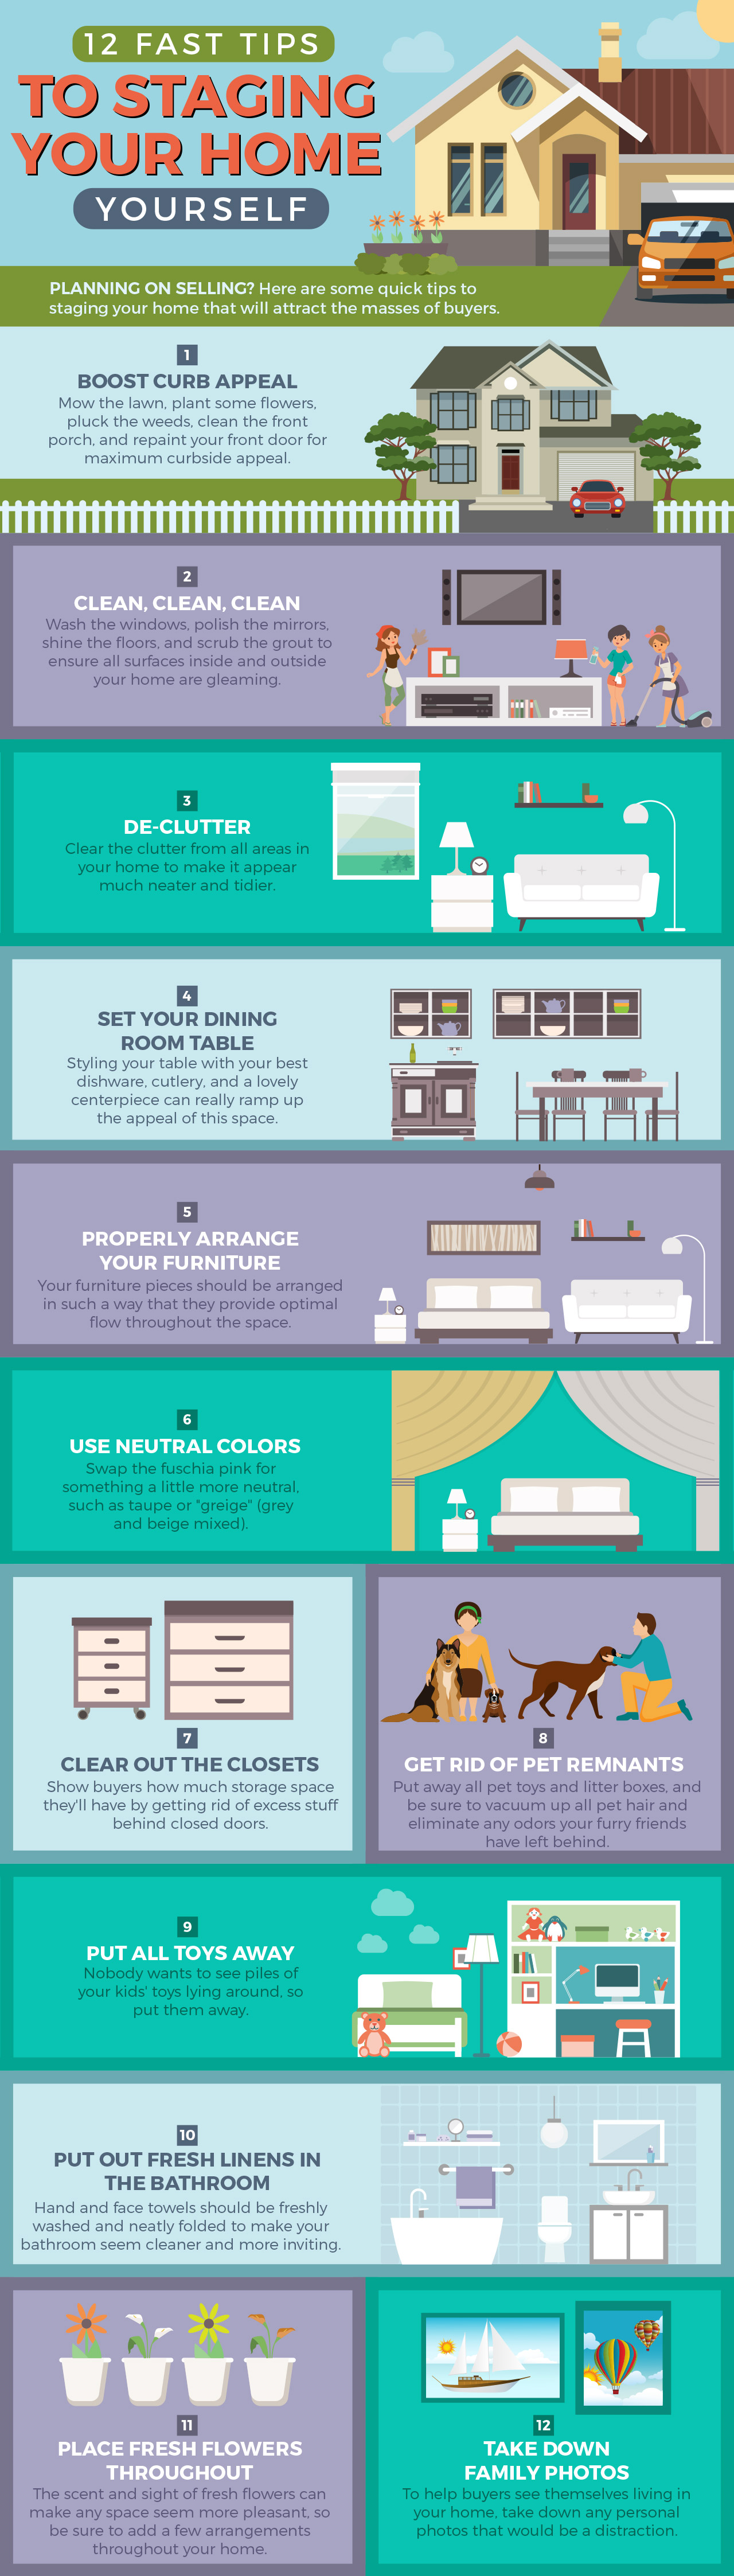 12-fast-tips-to-staging-your-home-yourself-infographic